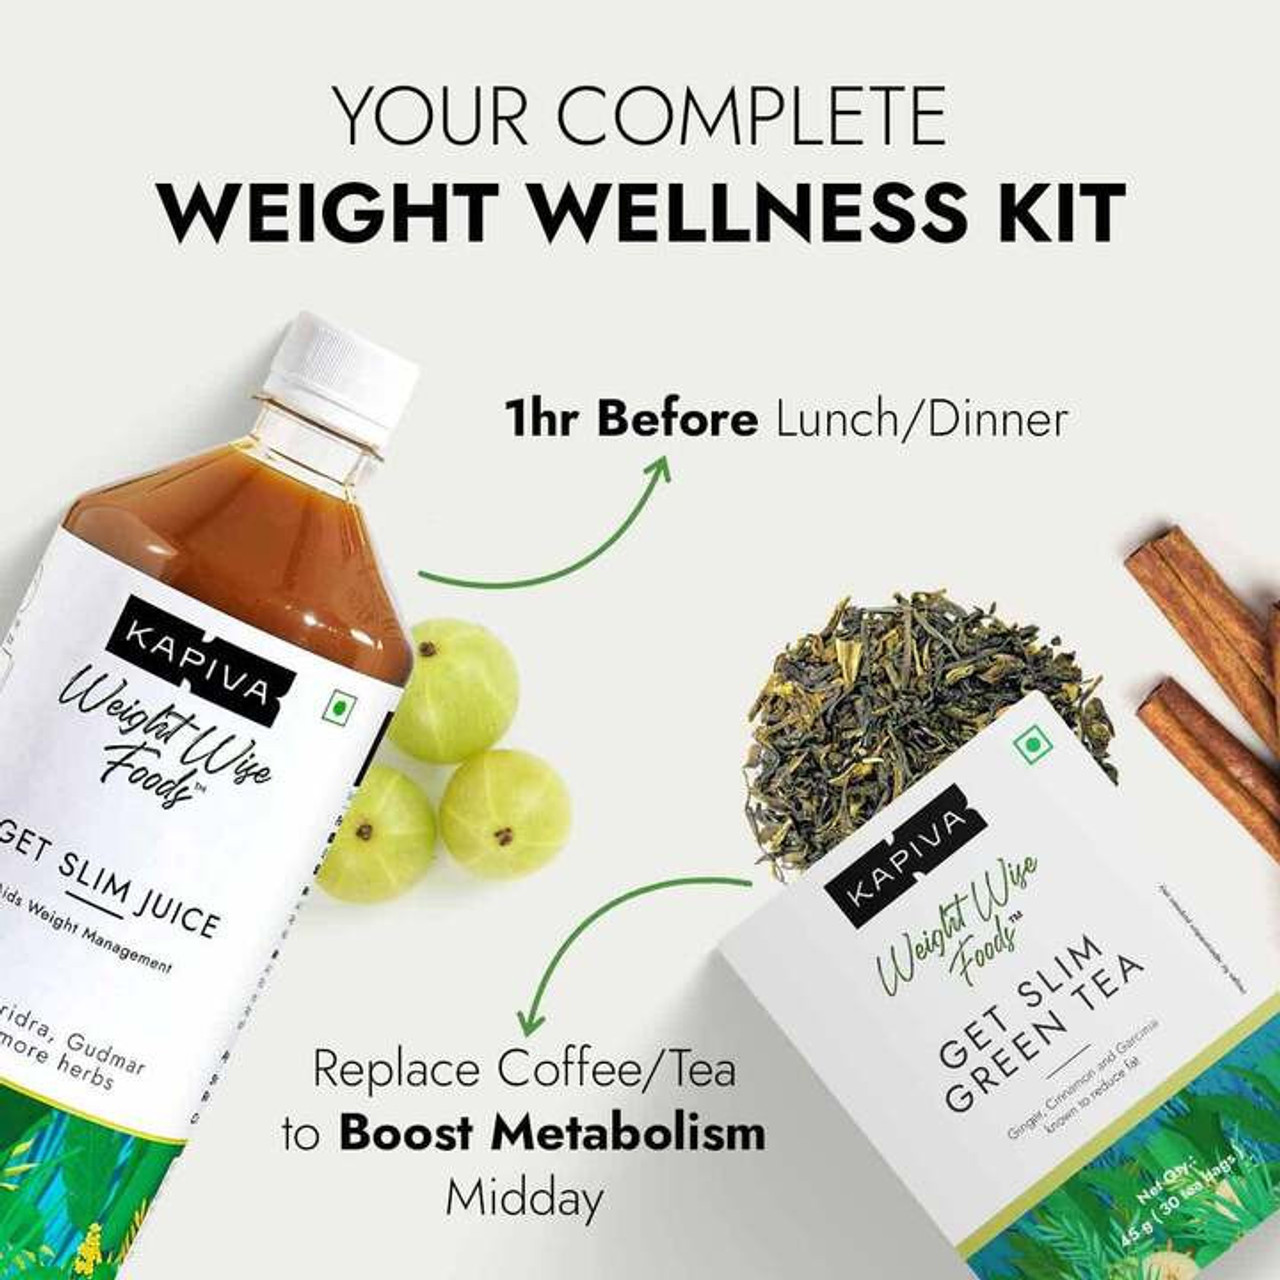 Matcha Slim: The Ultimate Solution for Your Weight Loss Goals by